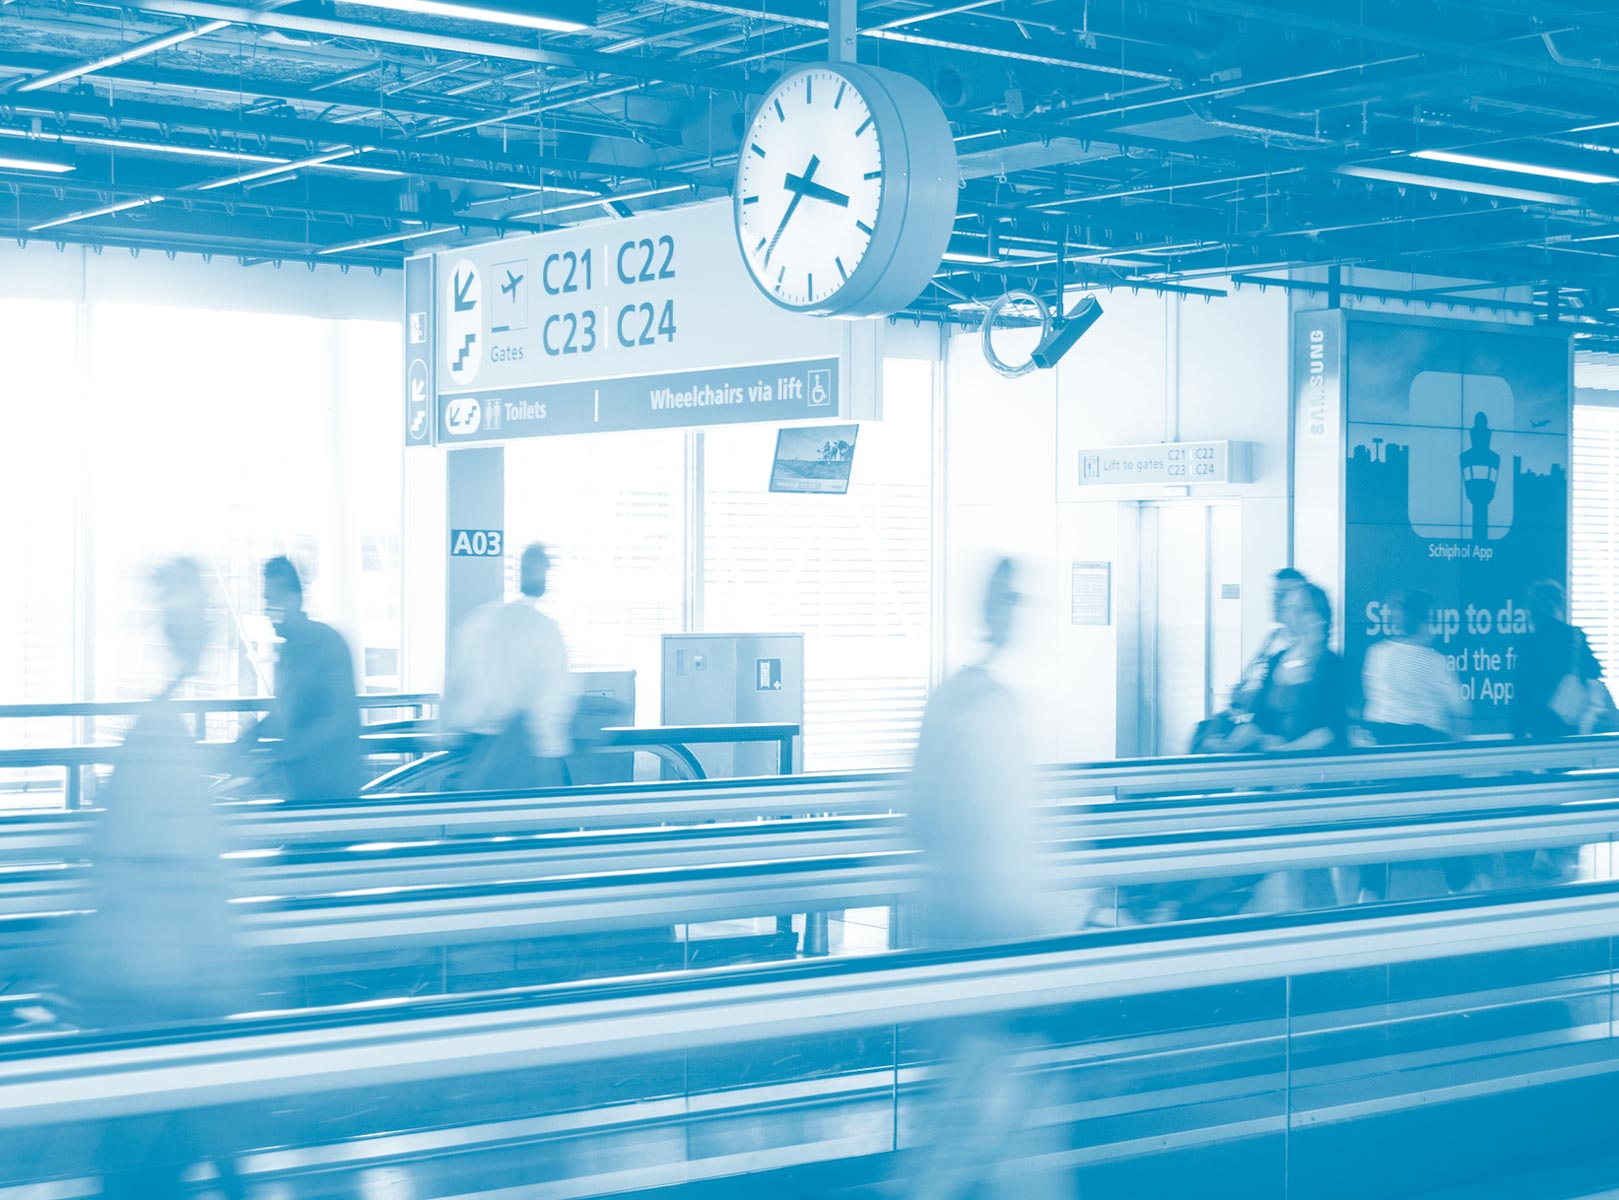 Large light blue duotone background photograph of people travelling across and flat ground escalator in an airport with a large clock at the top in the middle